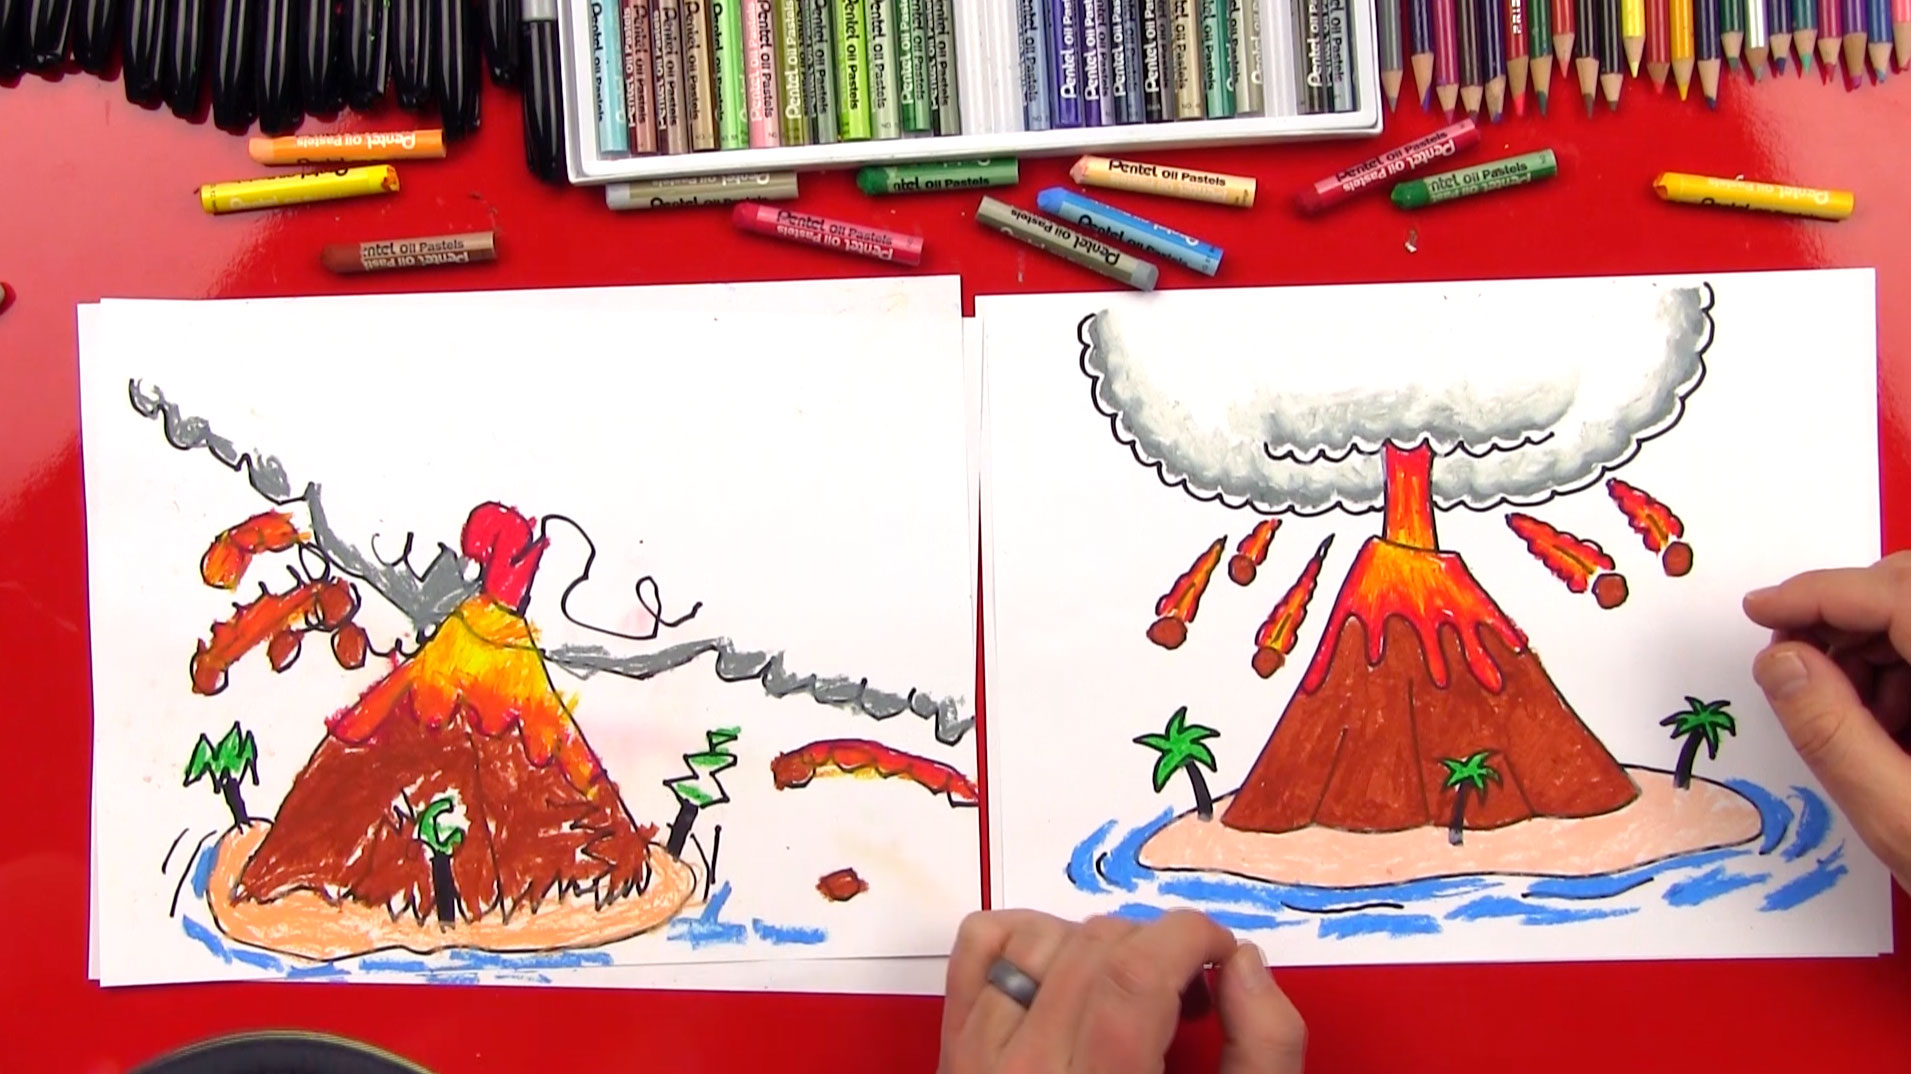 How to Draw a Volcano - Easy Drawing Tutorial For Kids